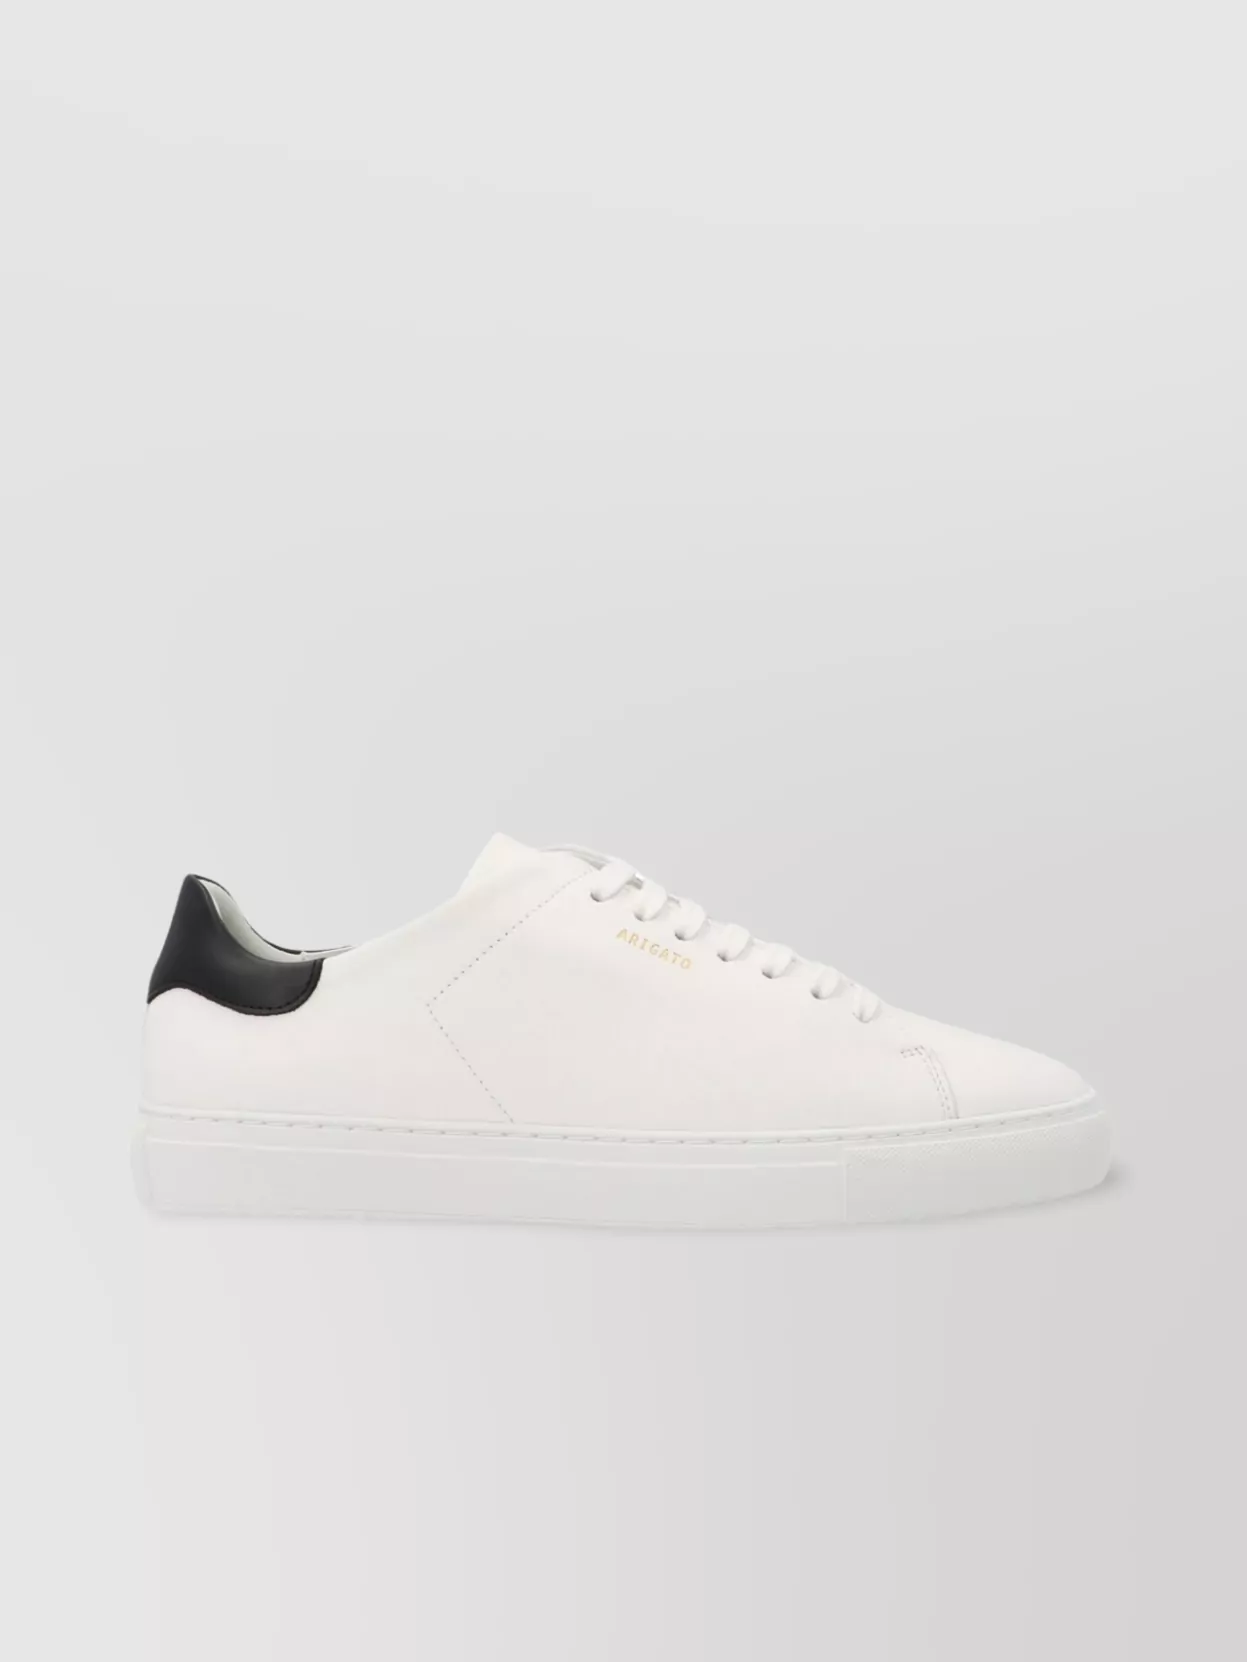 Axel Arigato Round Toe Low-top Sneakers With Contrasting Heel Tab In White